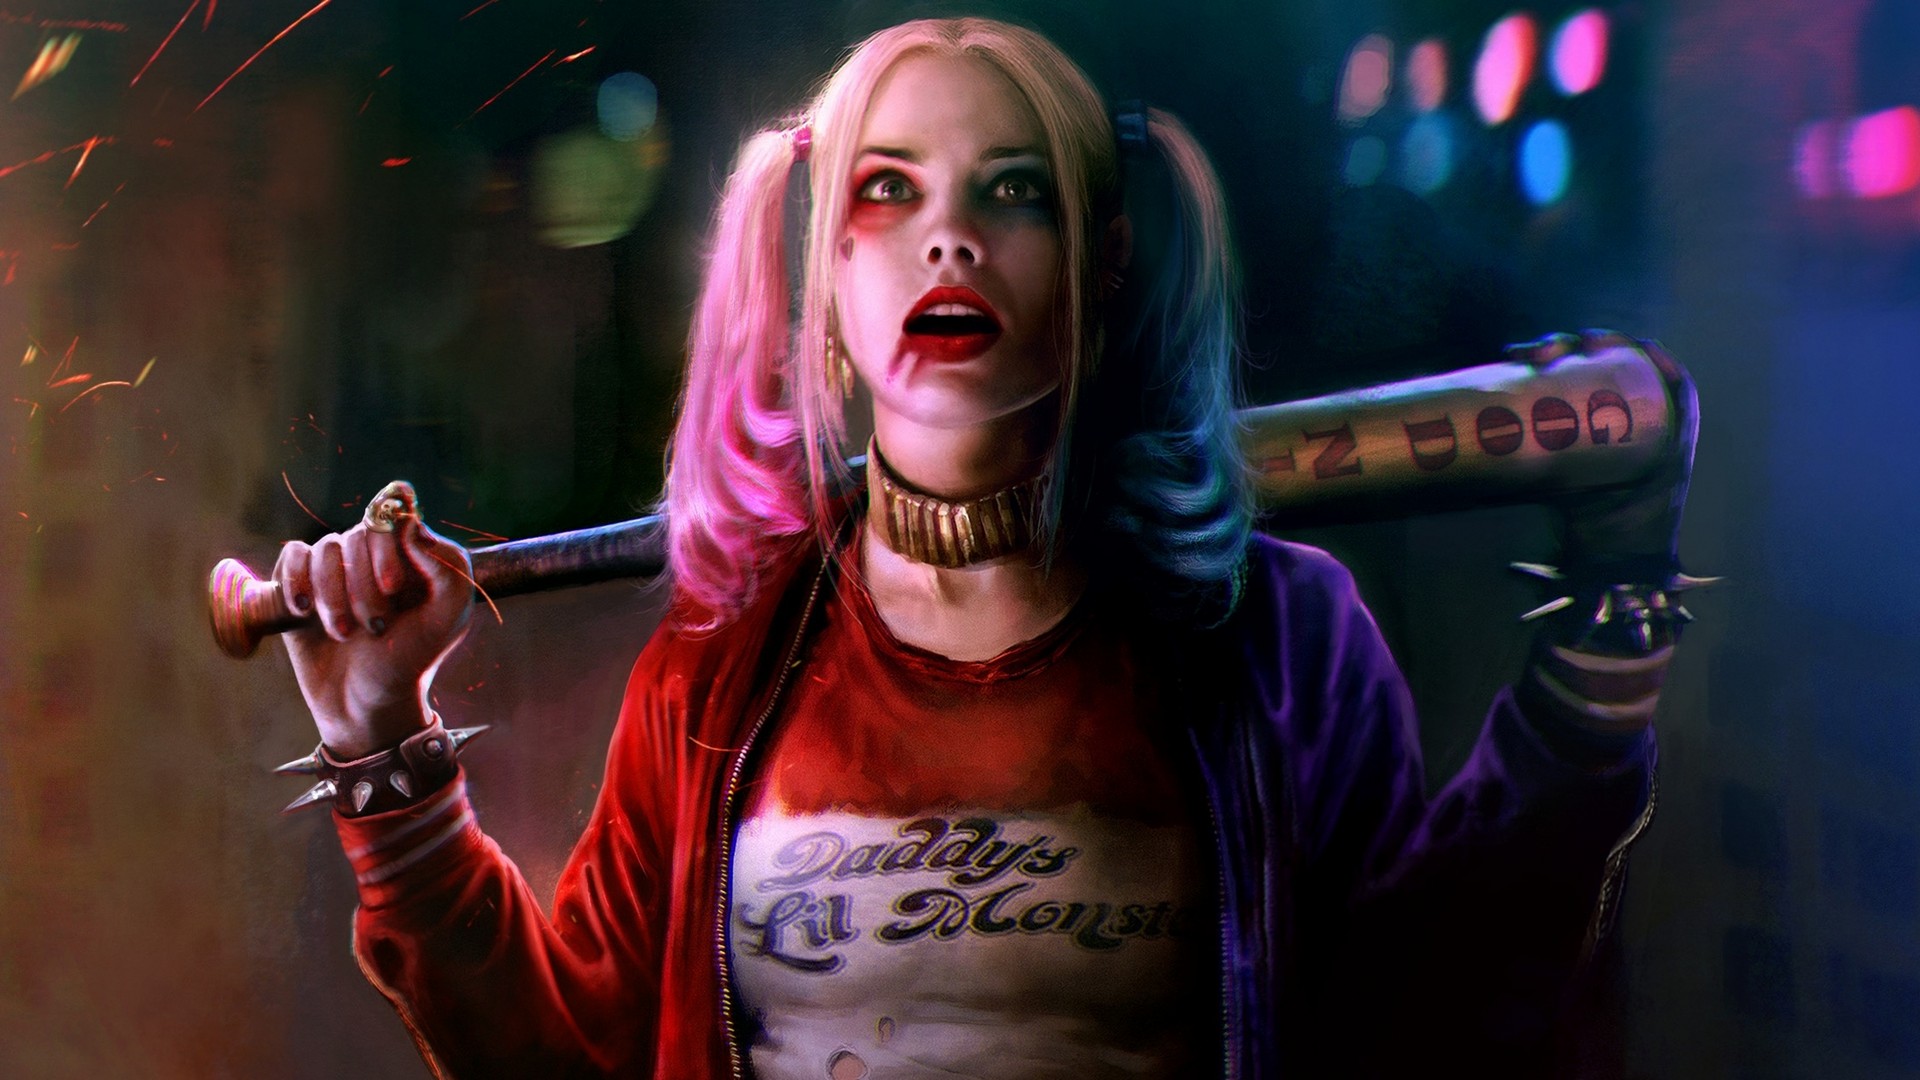 HD Wallpaper Harley Quinn with image resolution 1920x1080 pixel. You can make this wallpaper for your Desktop Computer Backgrounds, Mac Wallpapers, Android Lock screen or iPhone Screensavers